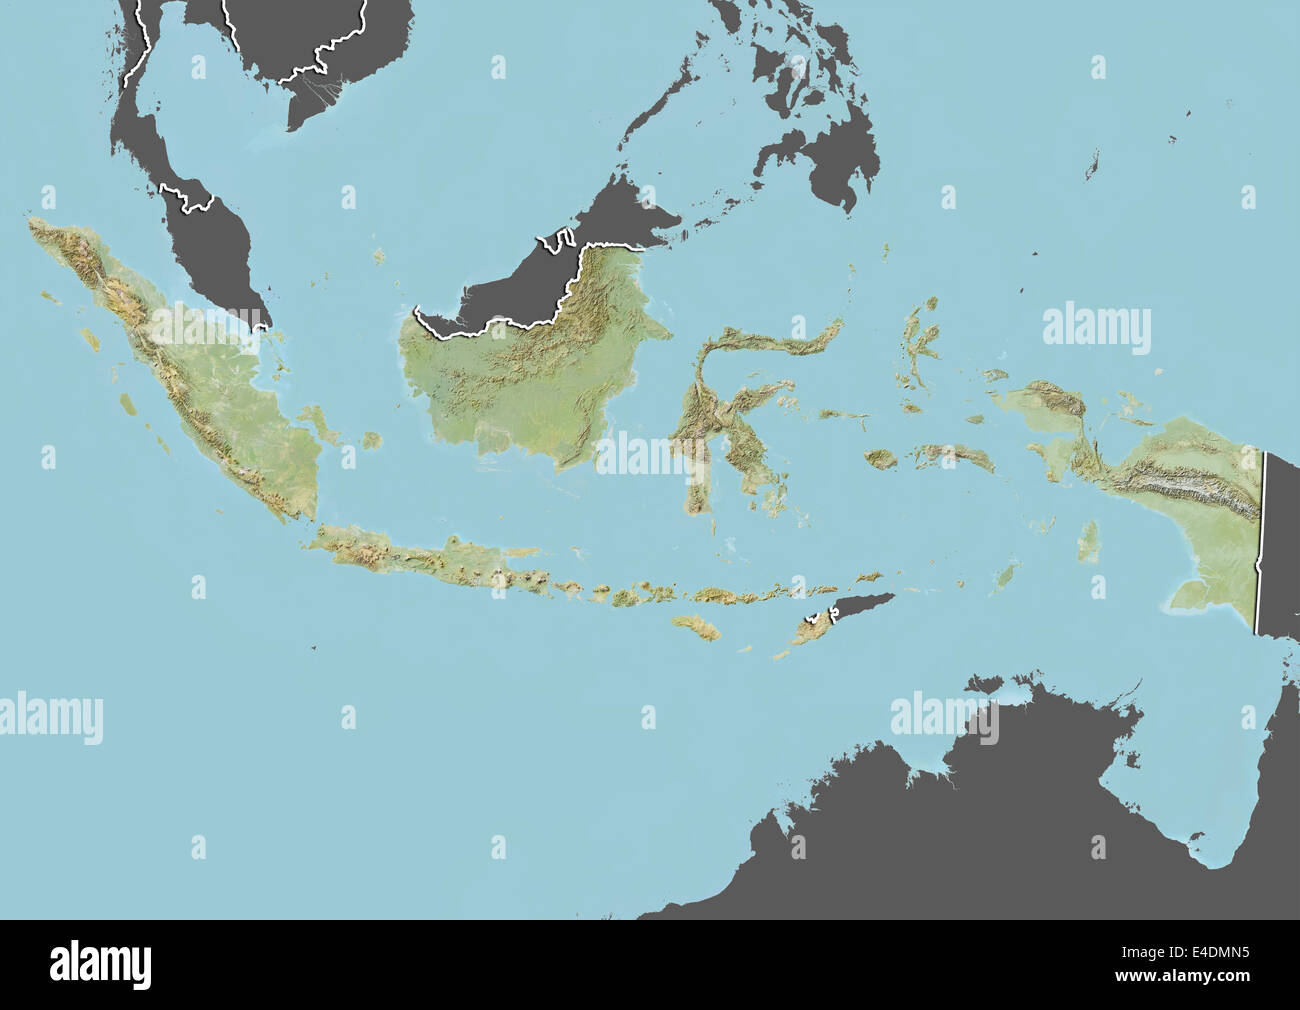 Indonesia, Relief Map With Border and Mask Stock Photo